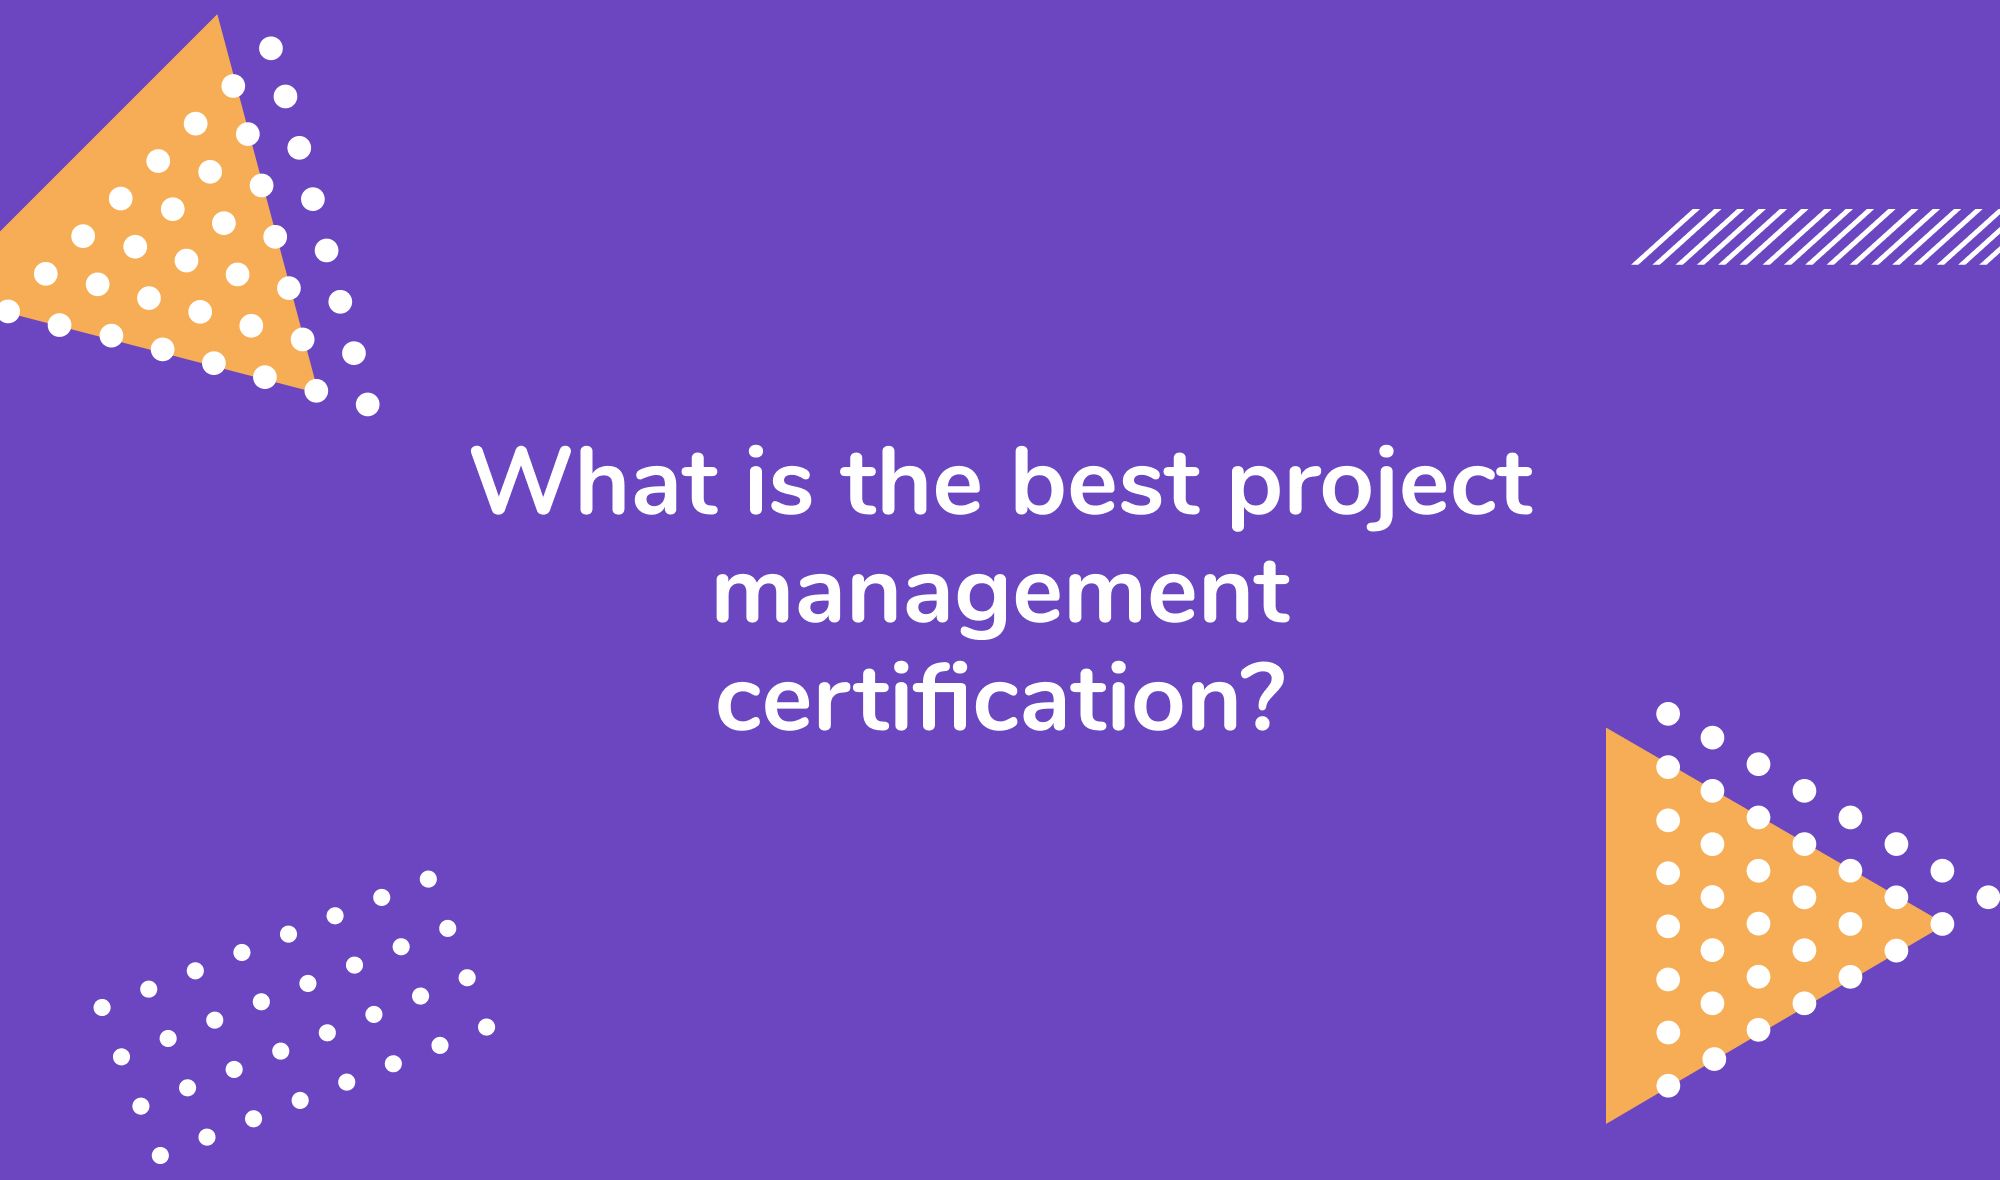 What is the best project management certification?